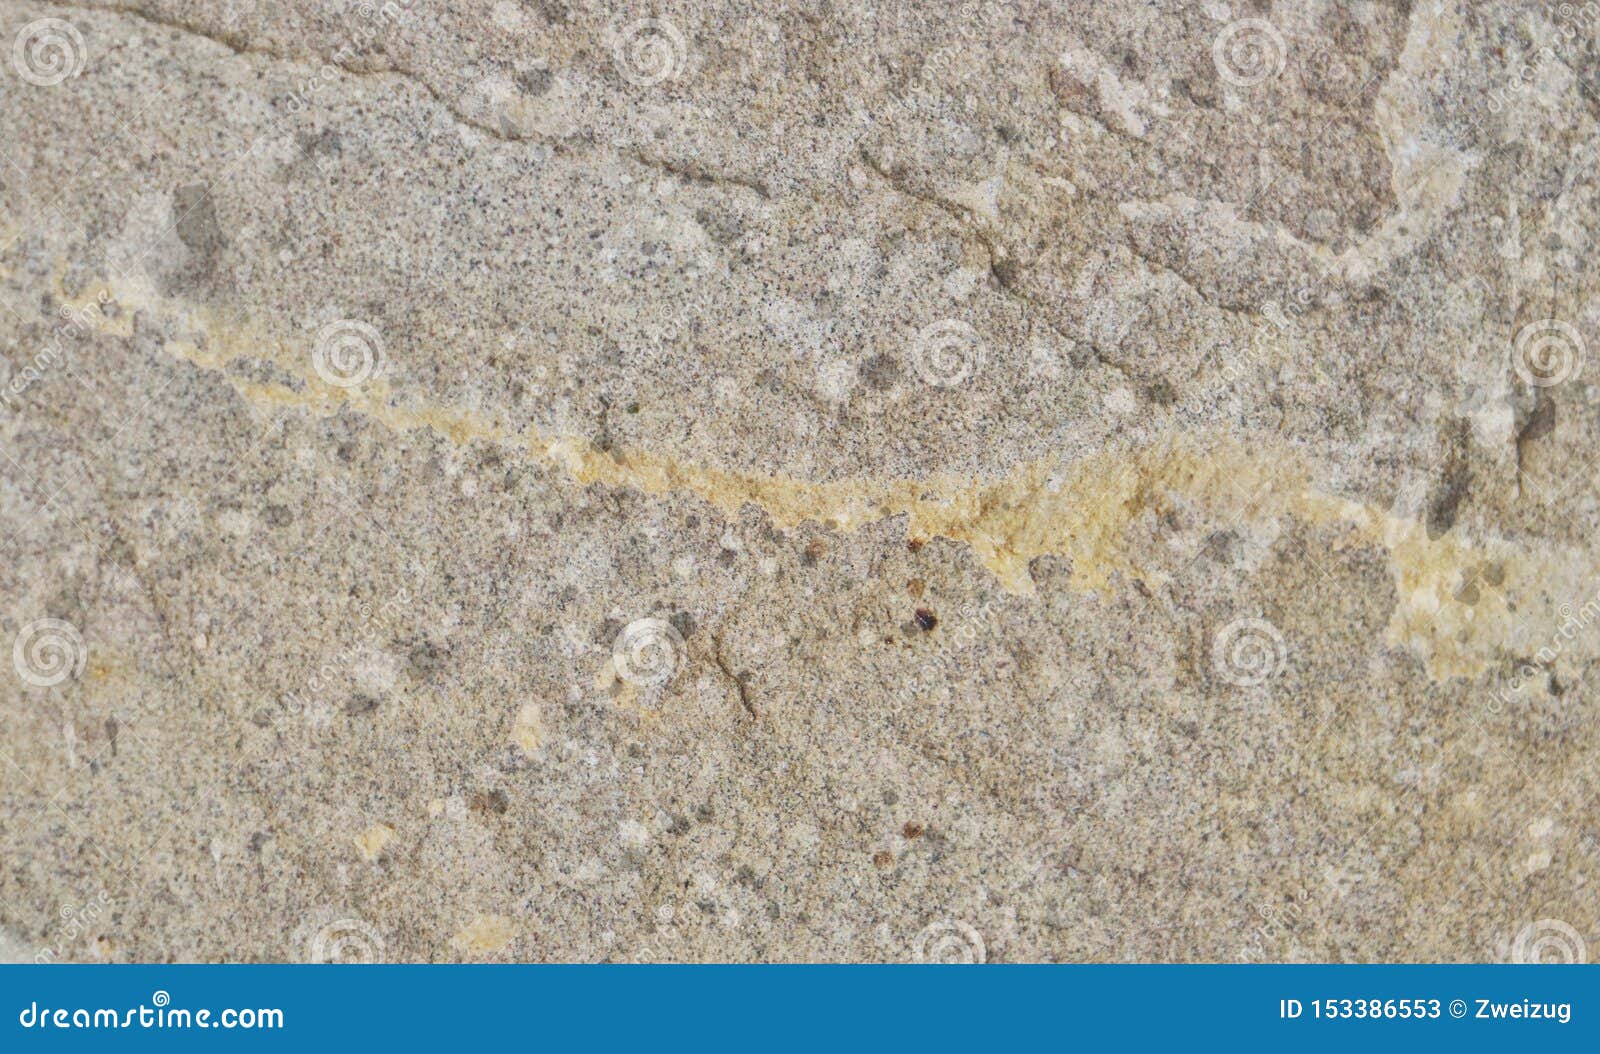 vintage grungy old sand stone tile texture background no 20.